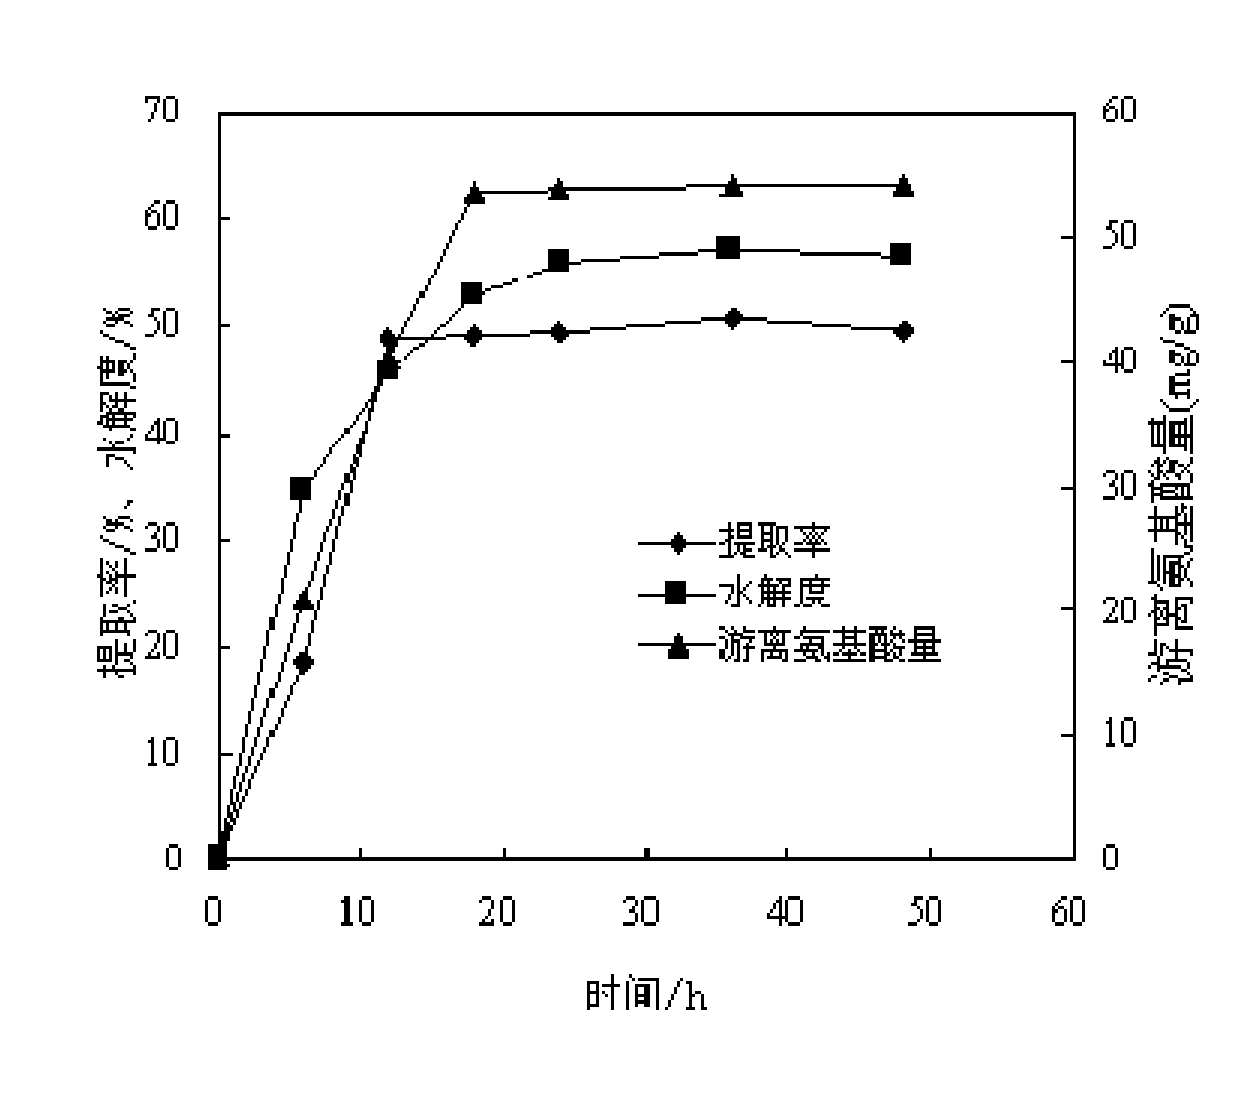 Method for preparing collagen peptide from fish scales